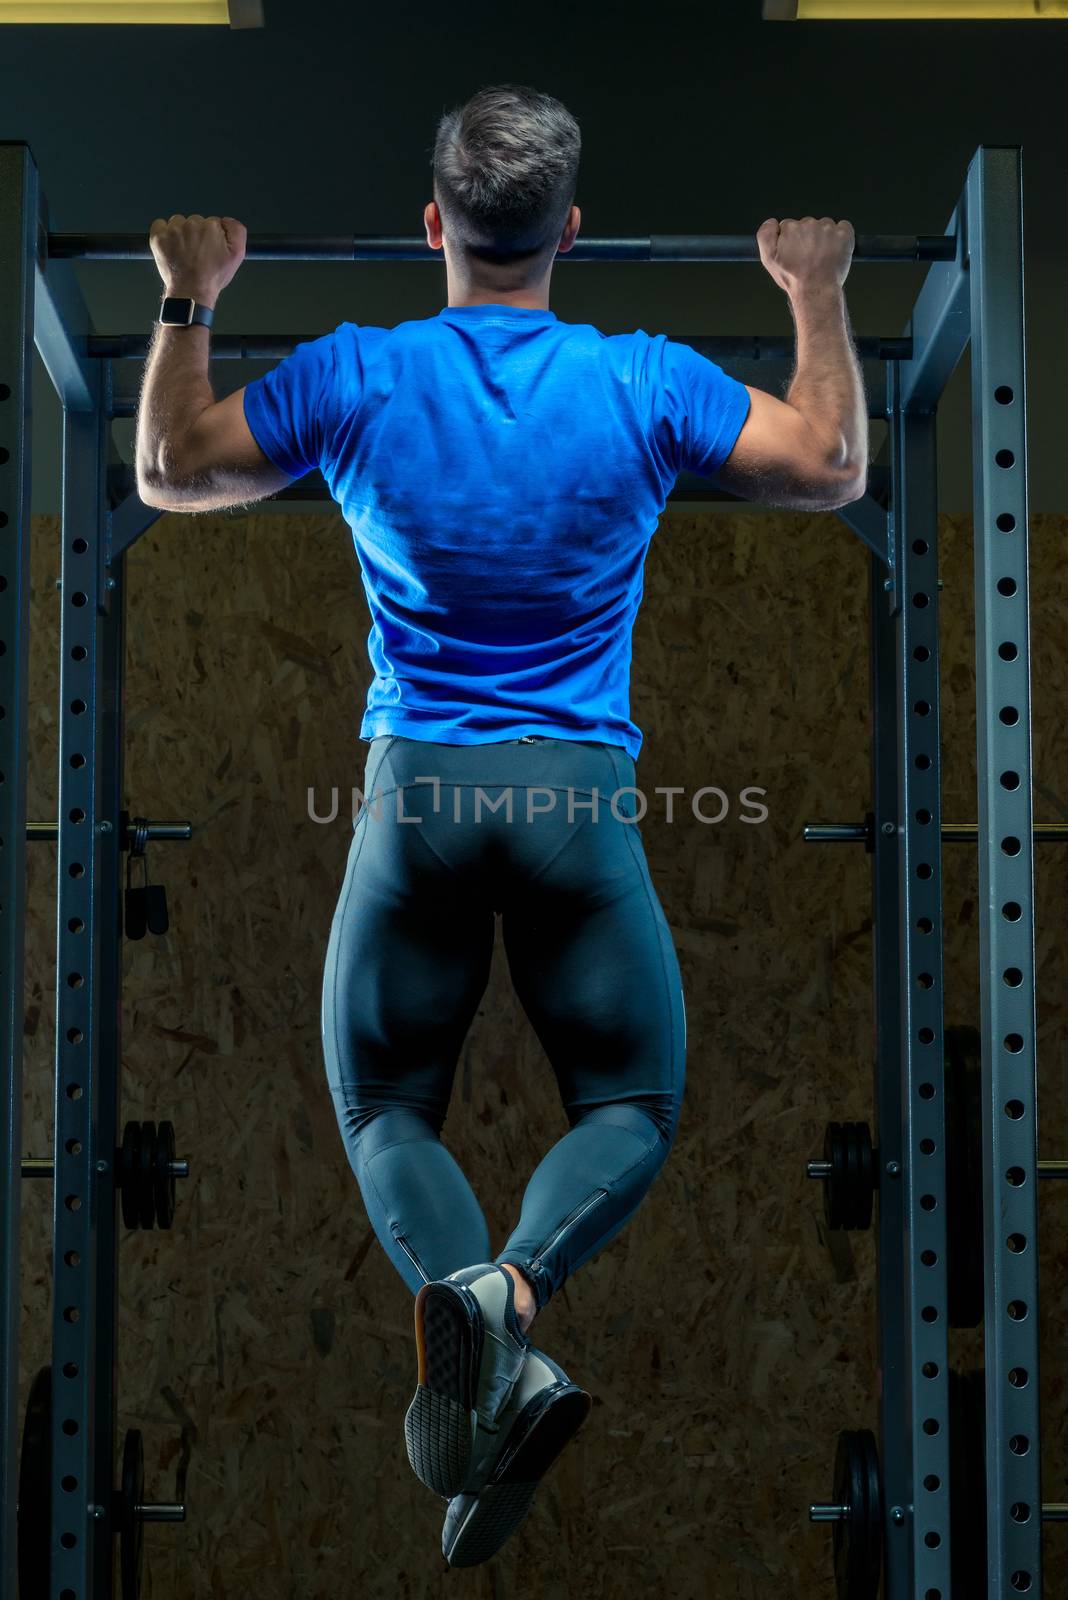 the athlete pulls himself up on the bar in the gym view from the by kosmsos111